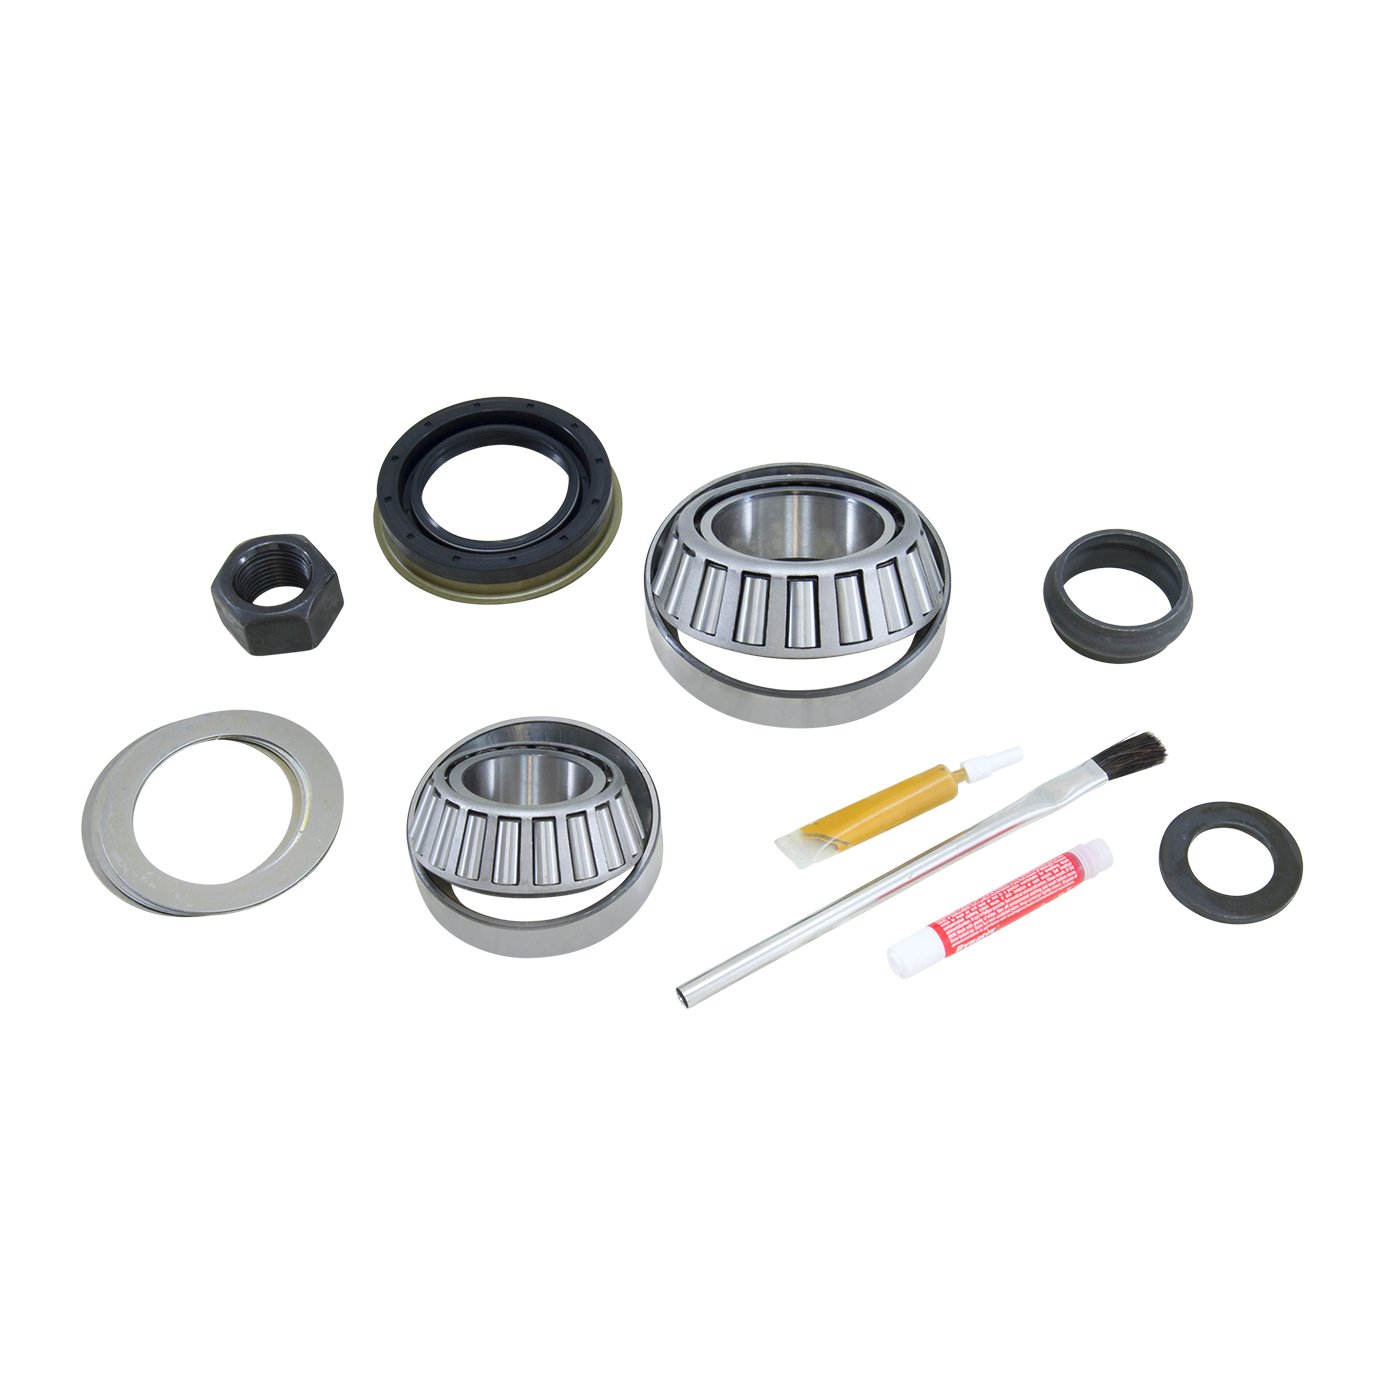 Pinion Install Kit For '92 And Older Dana 44 Ifs Differential